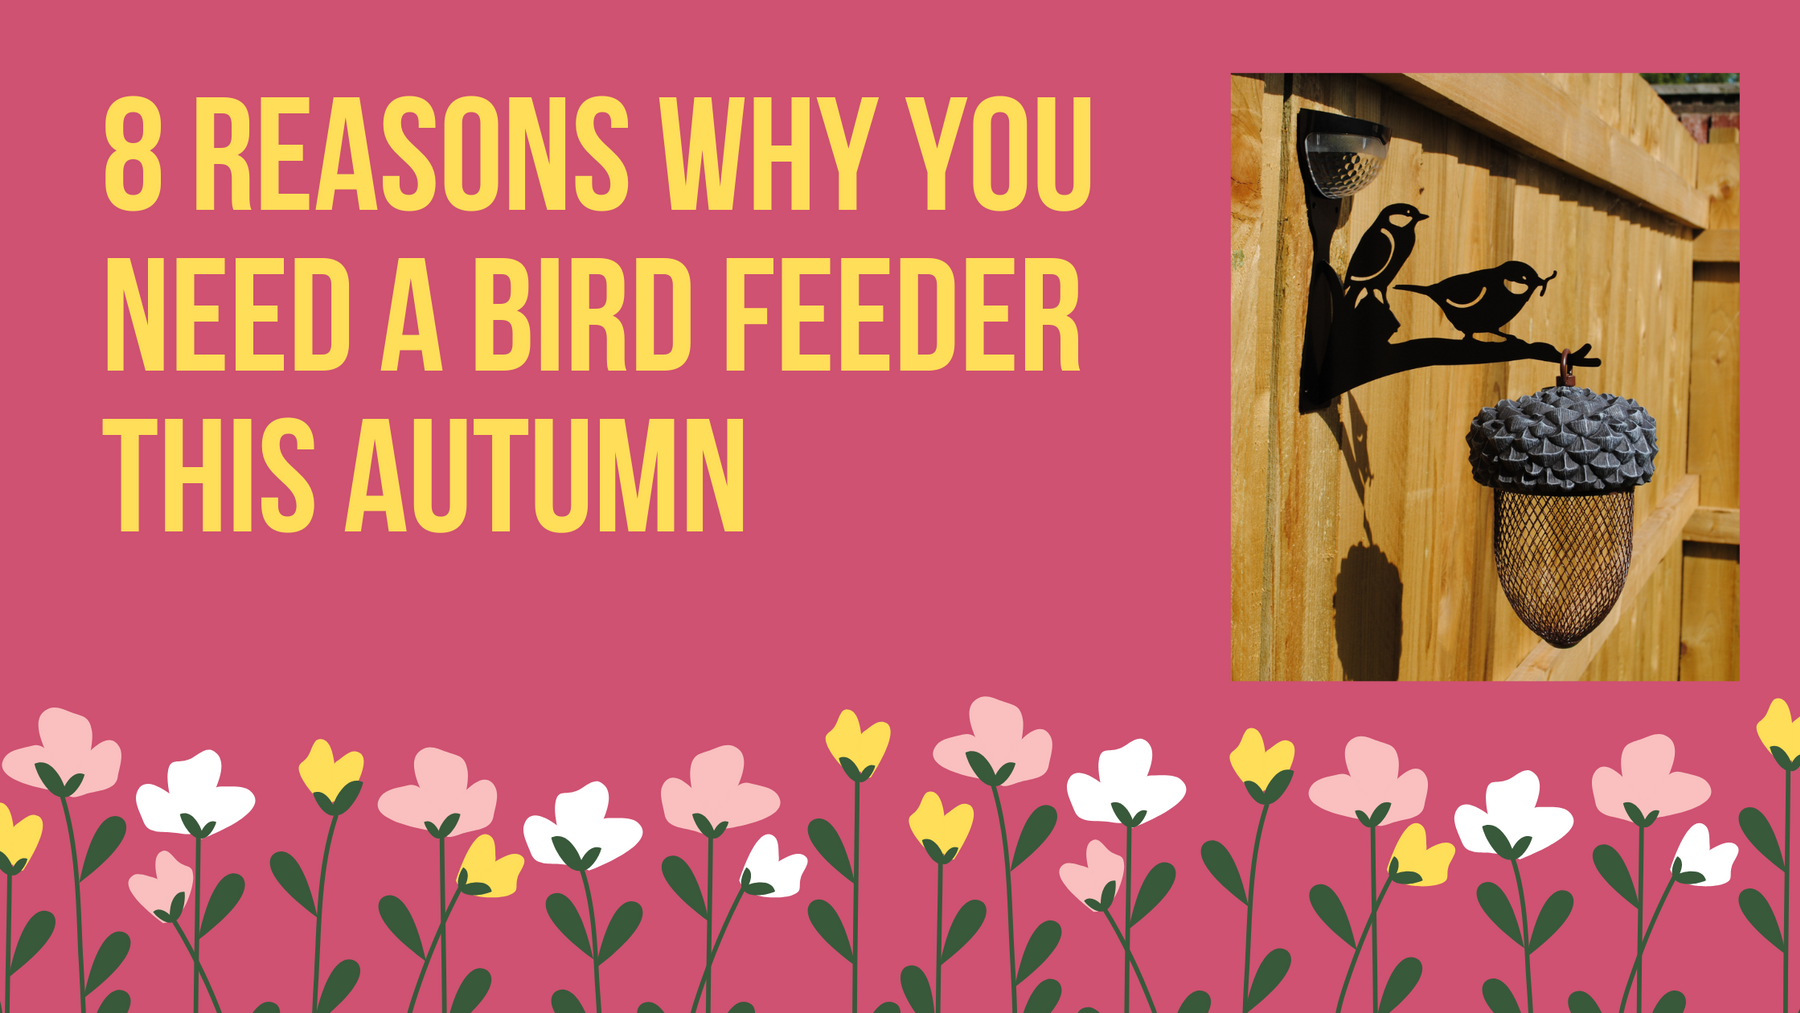 8 Reasons Why You Need A Bird Feeder This Autumn | Flory's Online